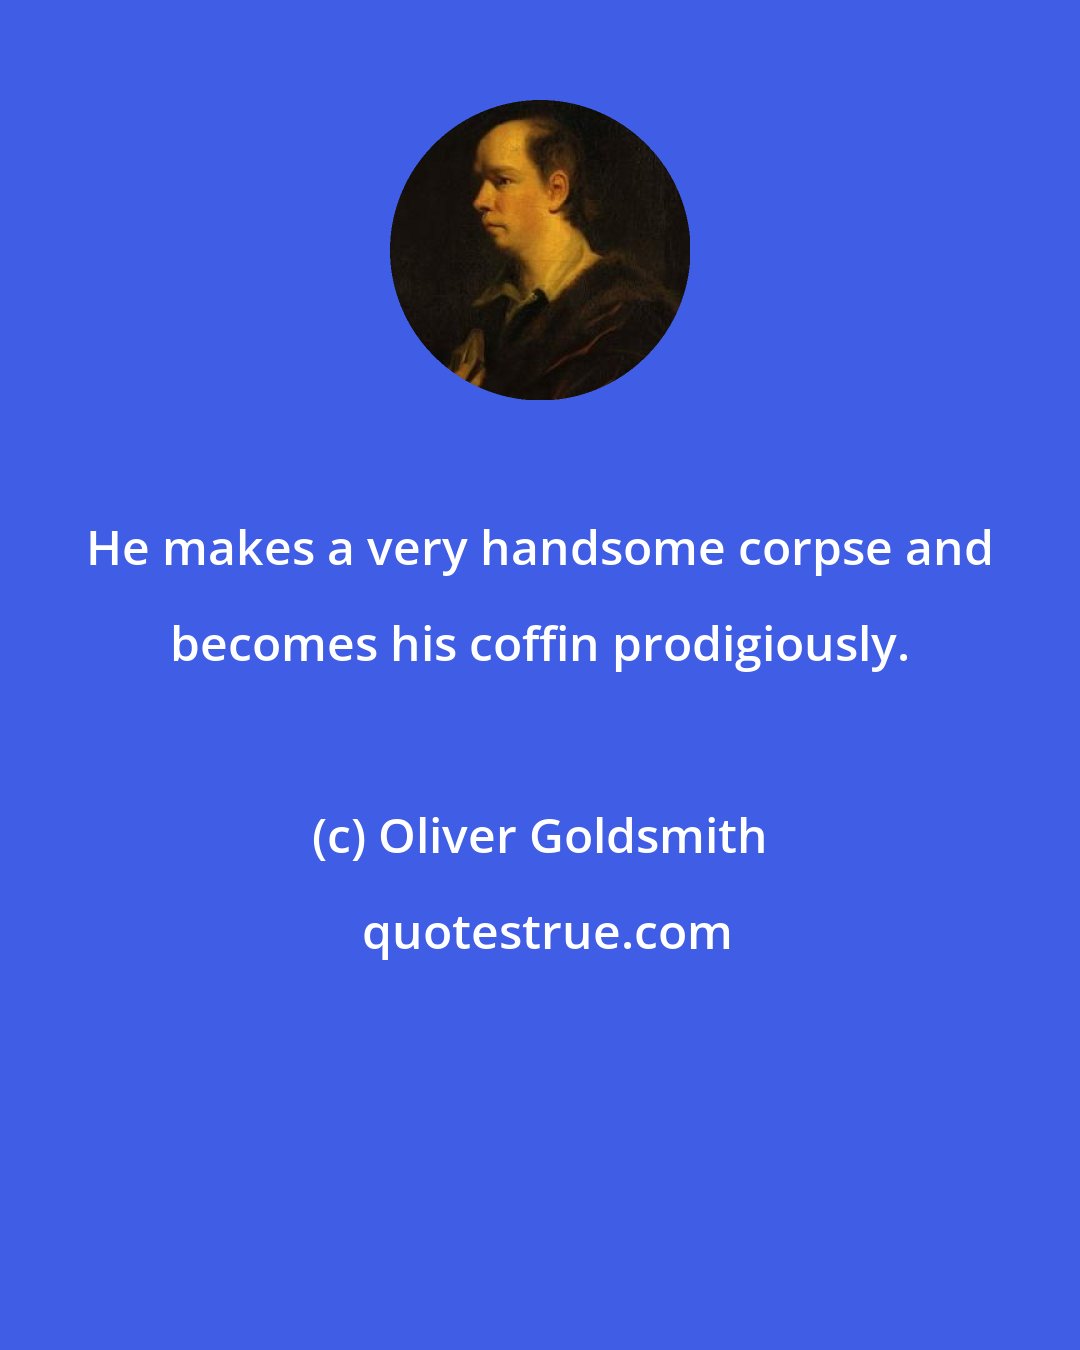 Oliver Goldsmith: He makes a very handsome corpse and becomes his coffin prodigiously.